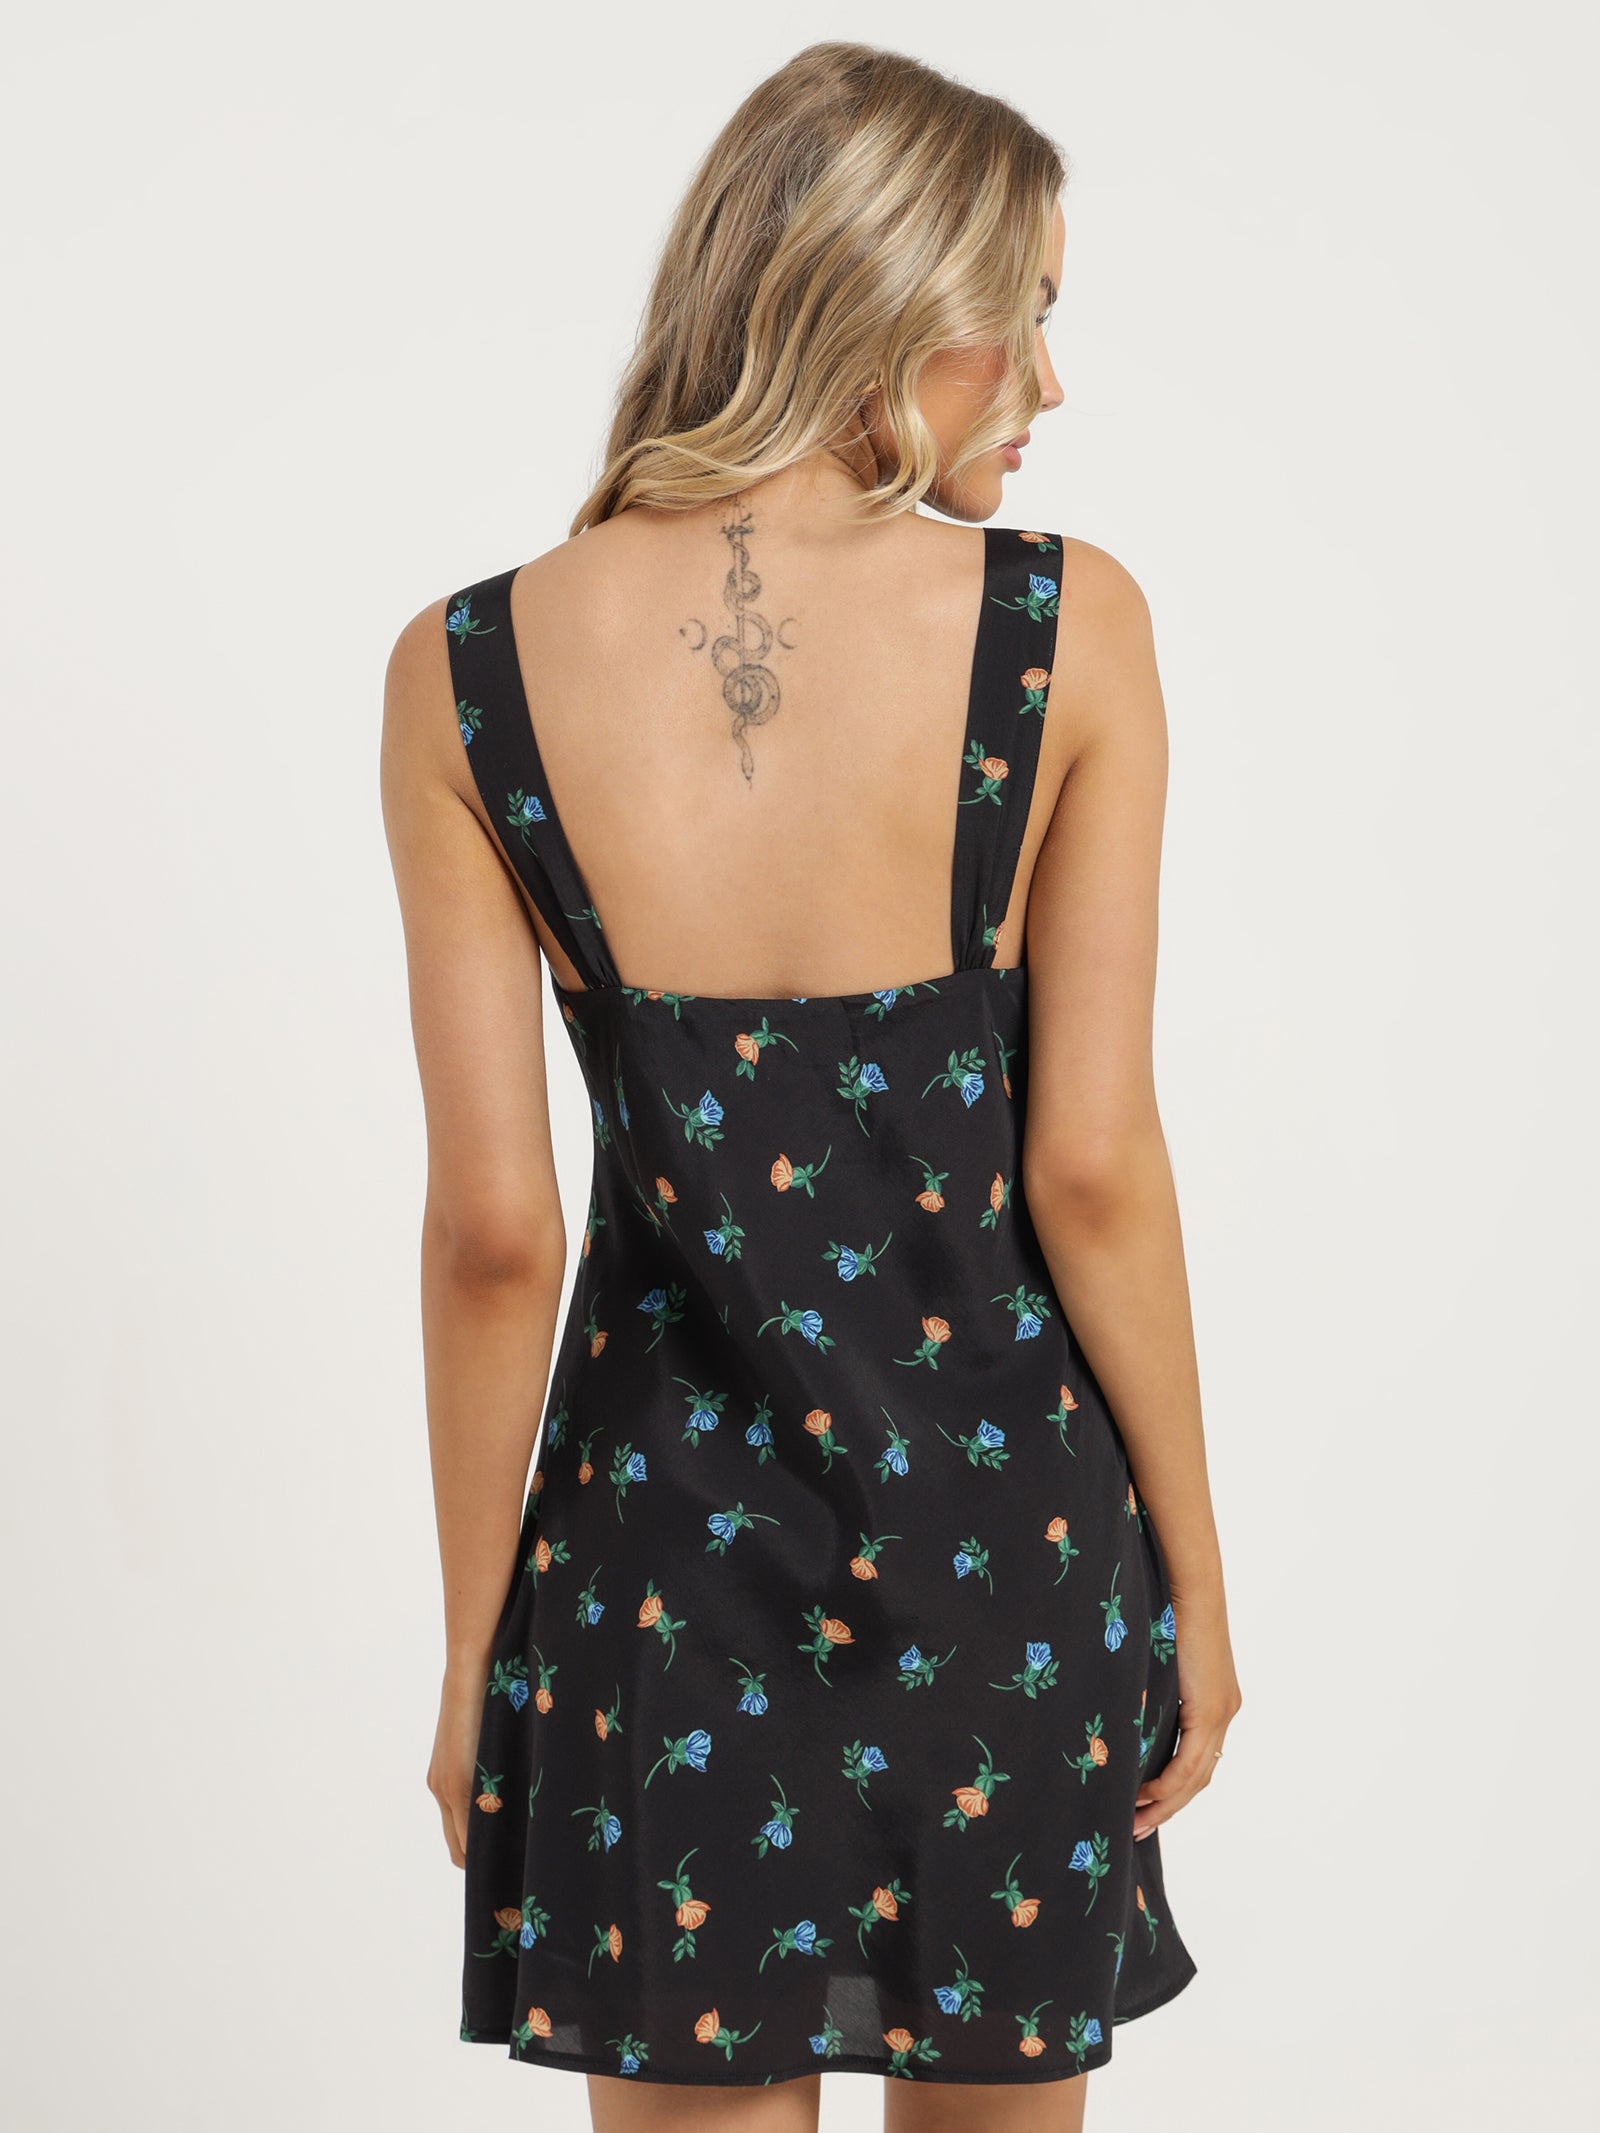 Lover Mini Dress in Forget Me Not